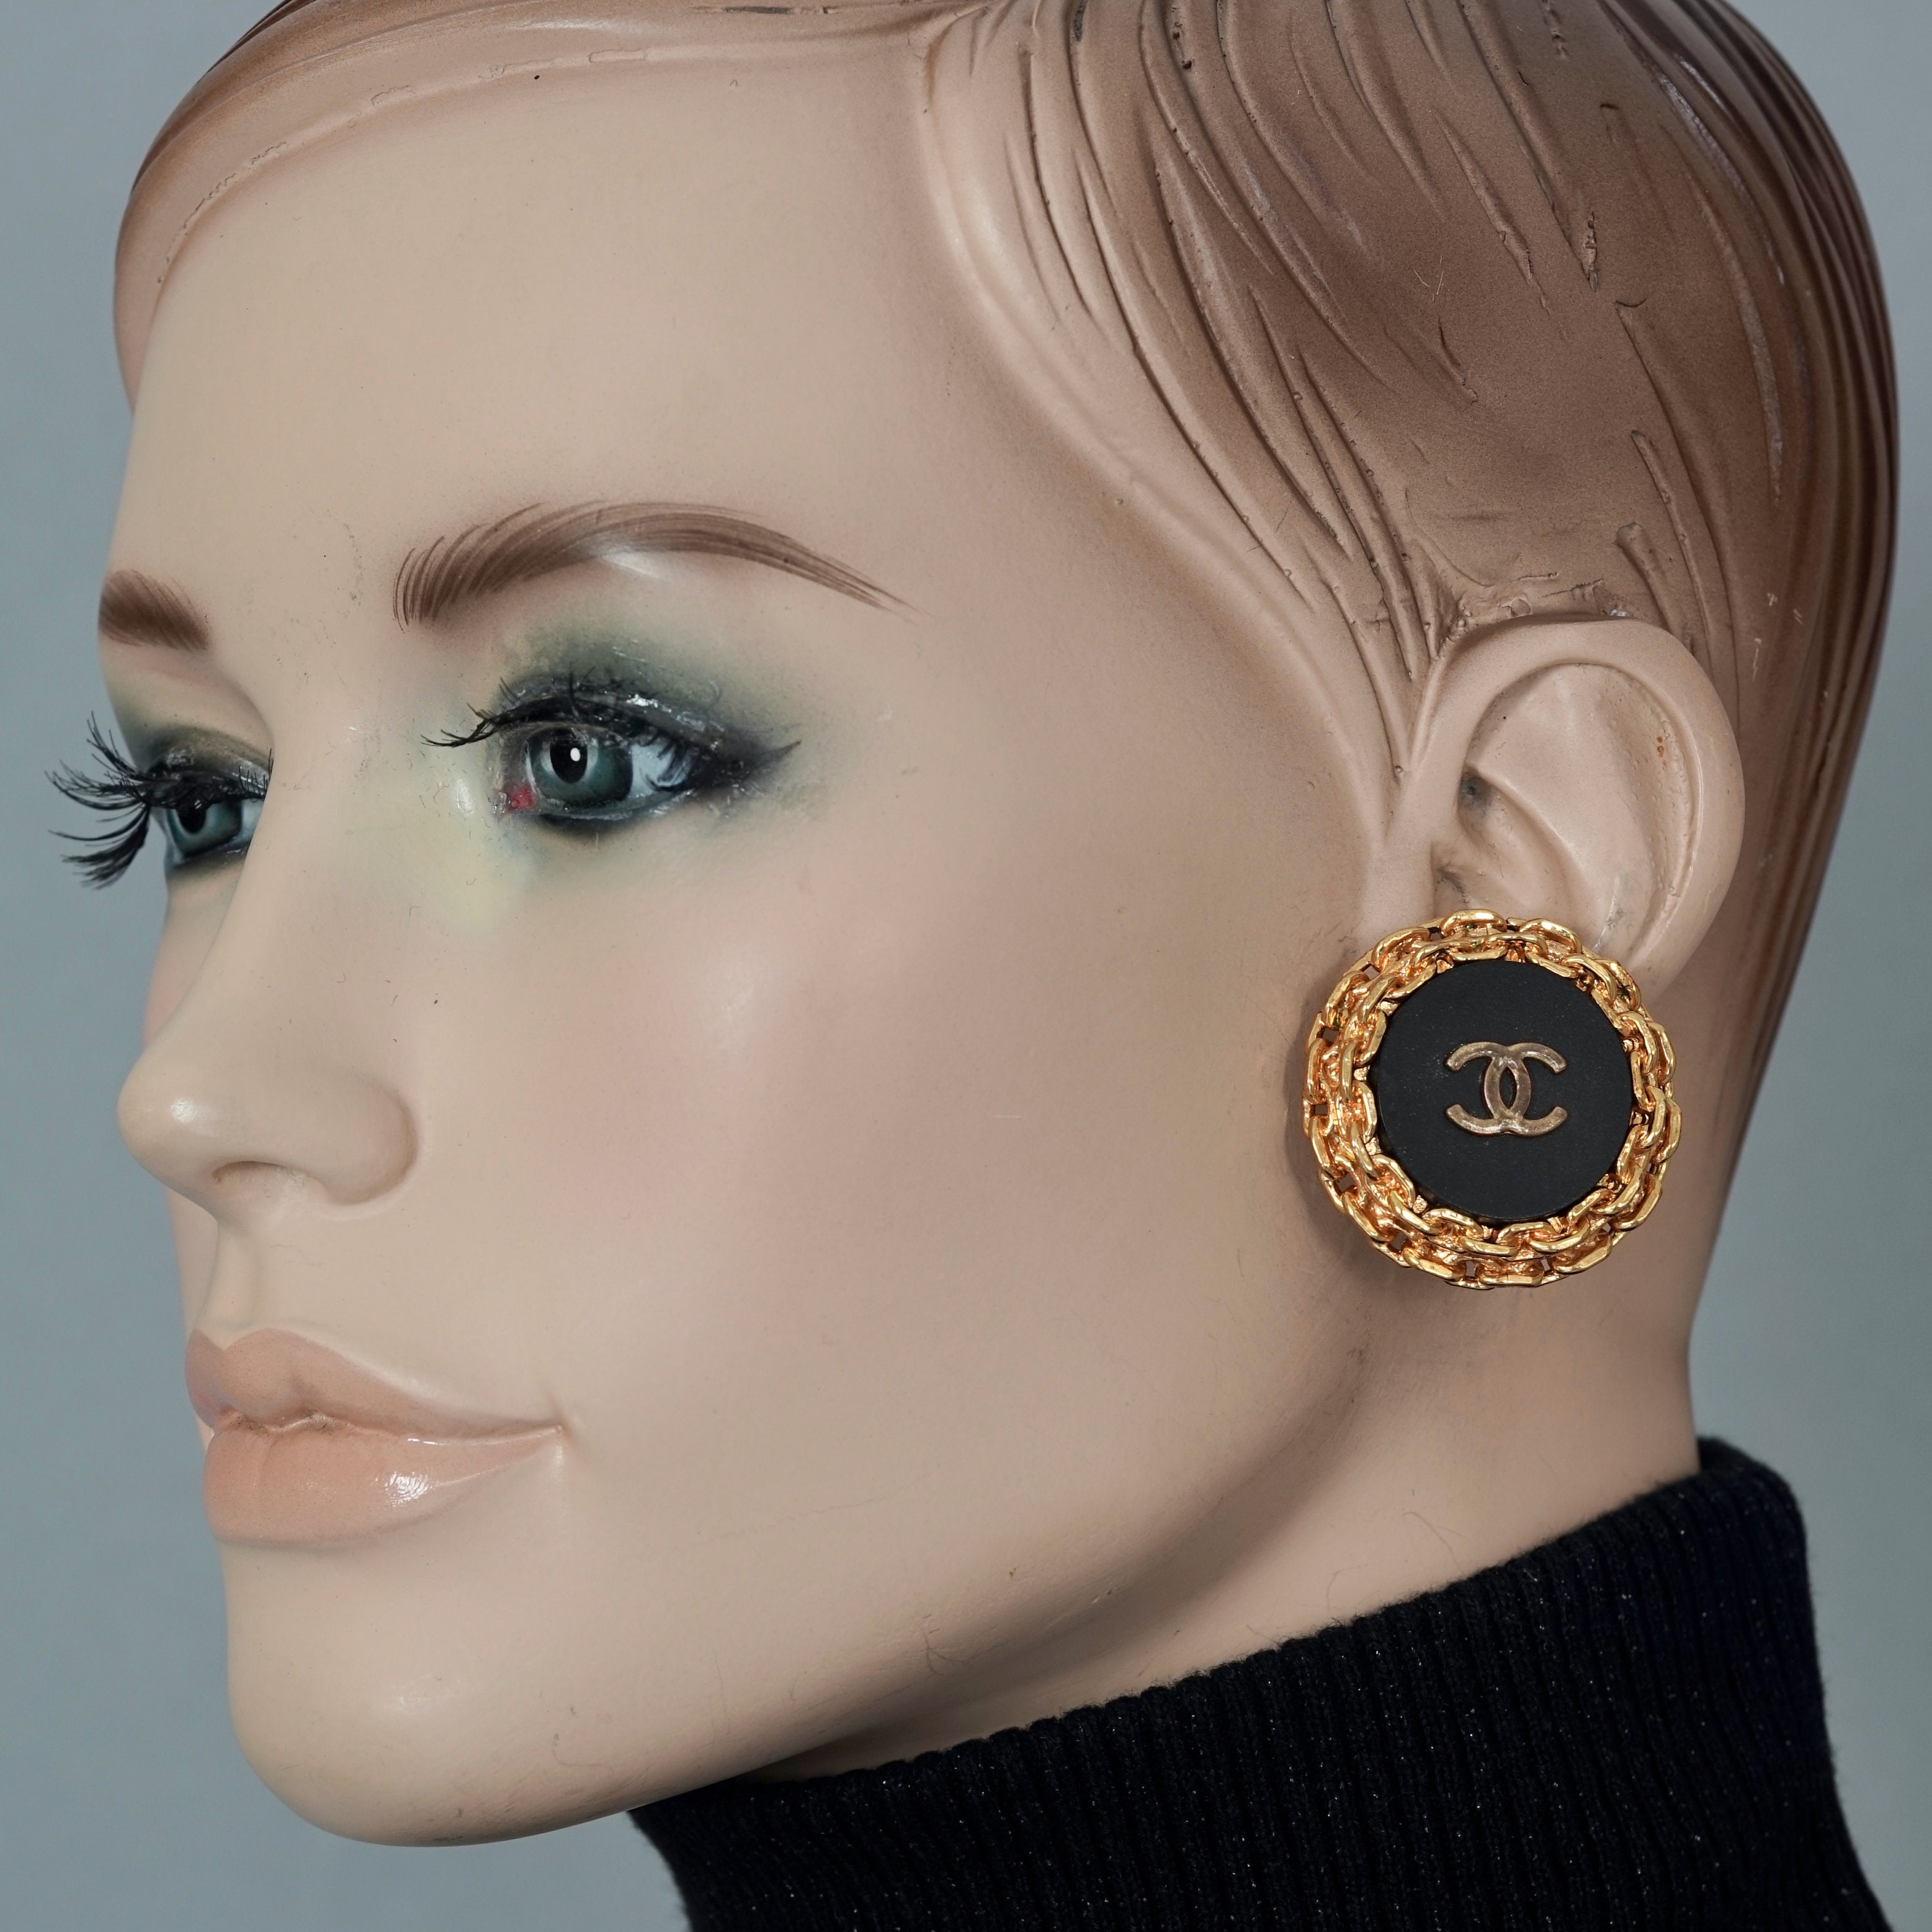 Chanel Iconic Bird Cage Clip Earrings 1993